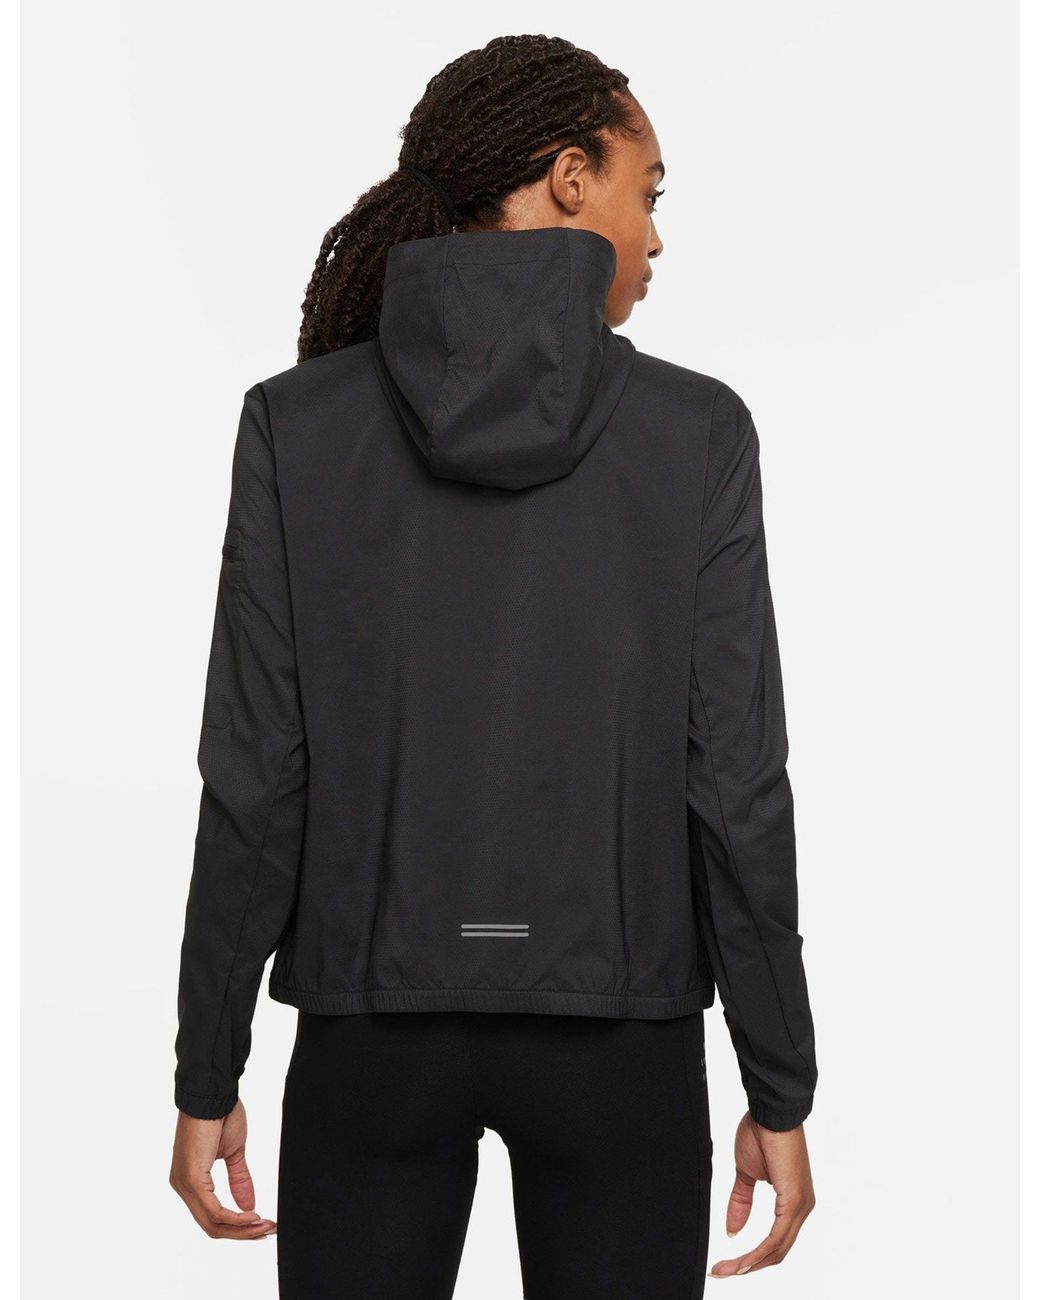 Nike Impossibly Light Jacket in Black | Lyst